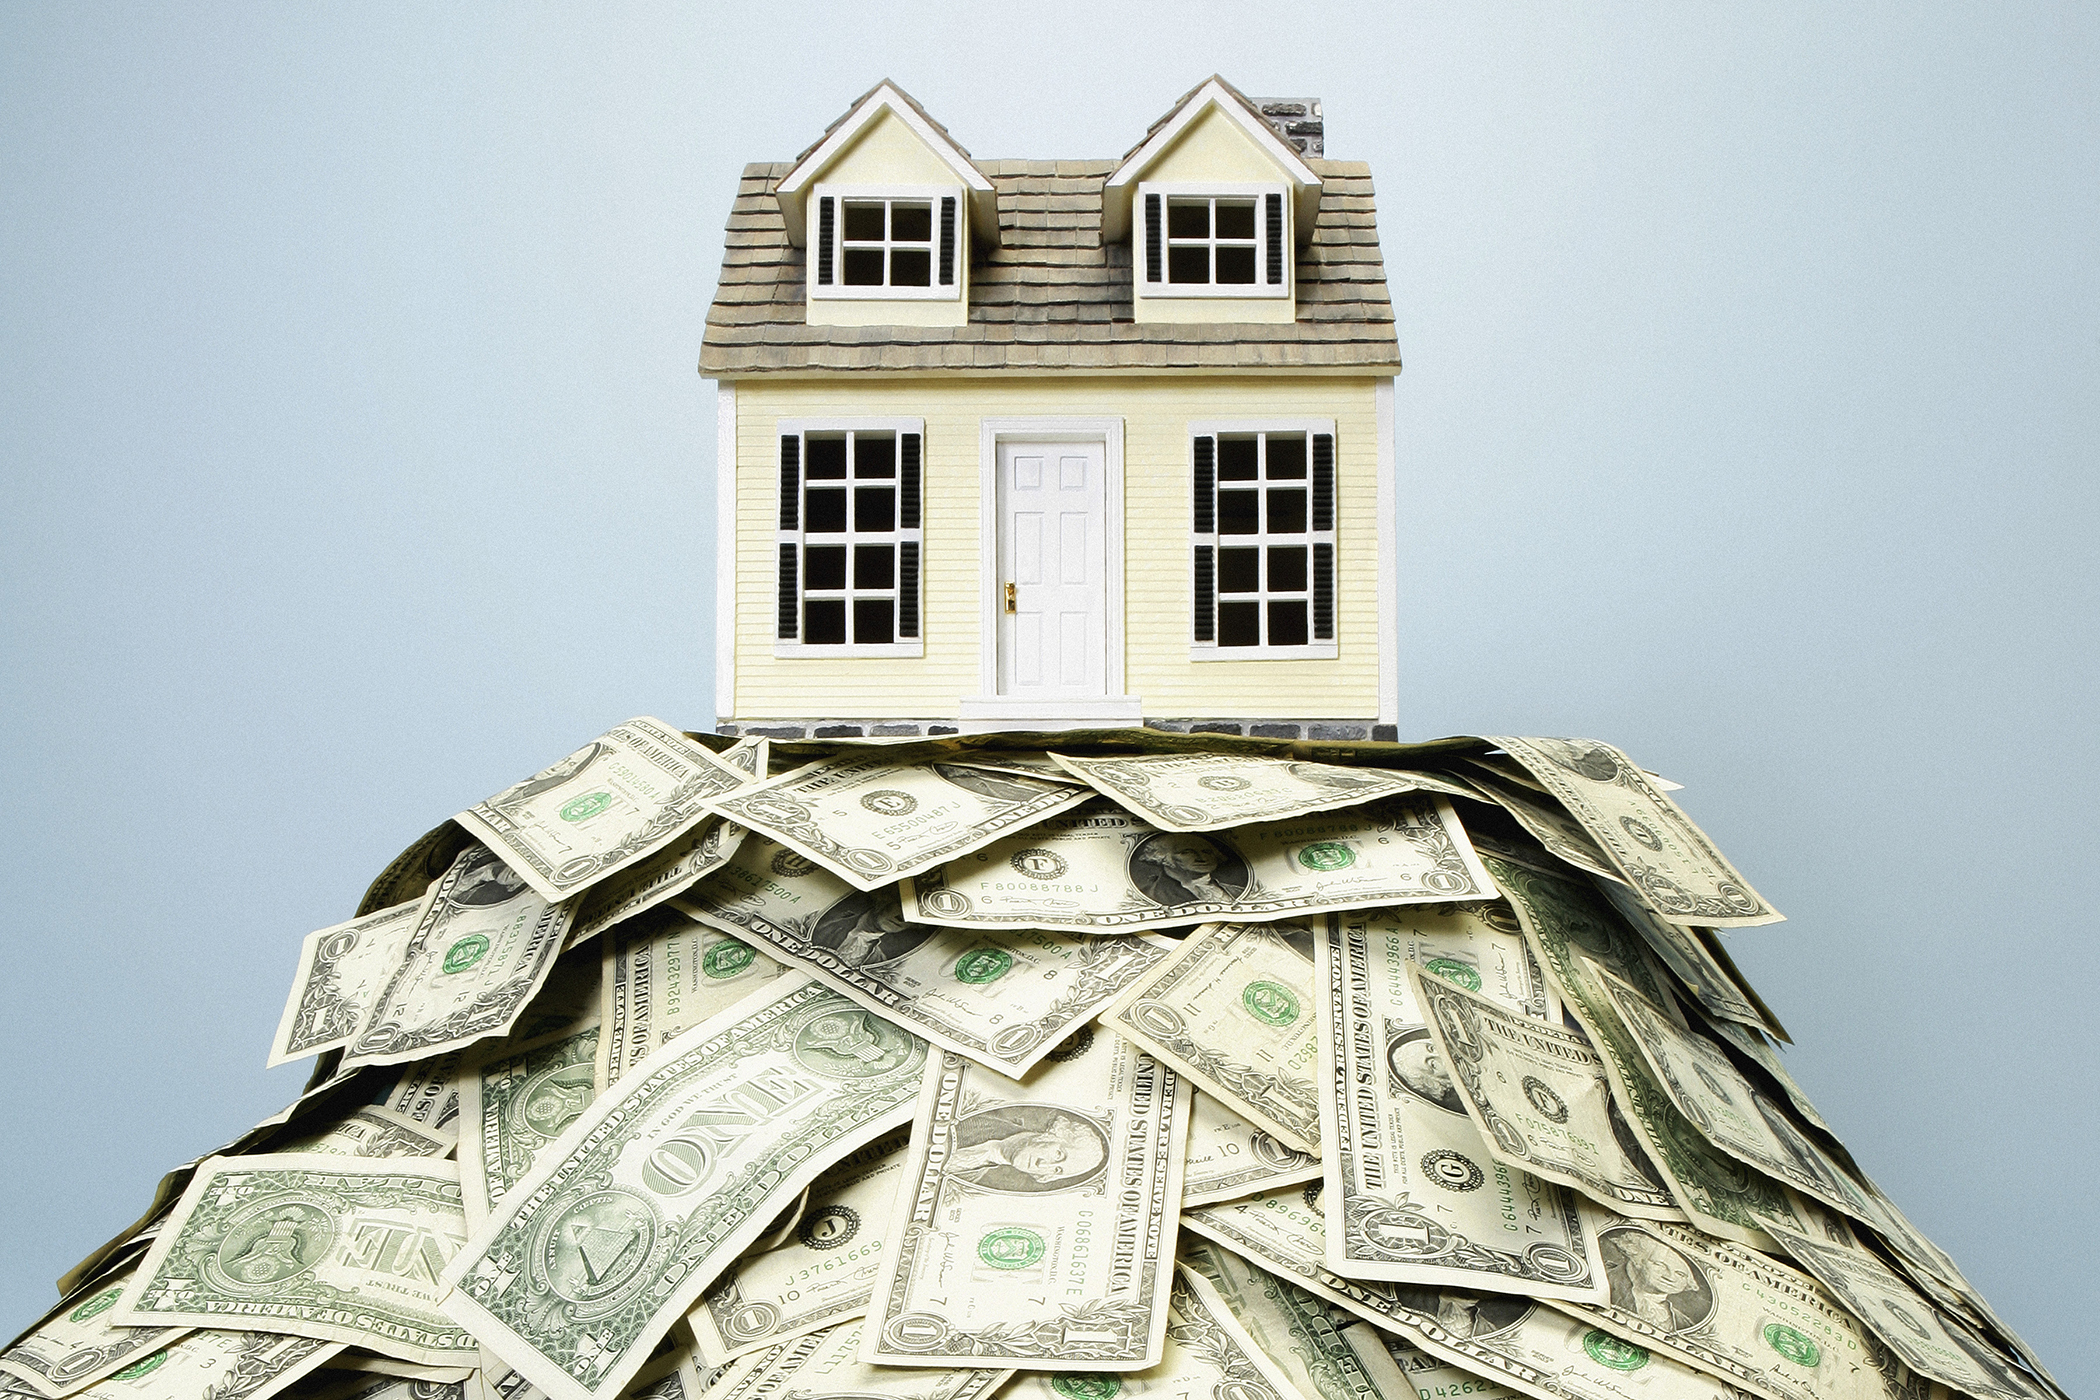 Should You Ever Pay Cash When Buying a Home?